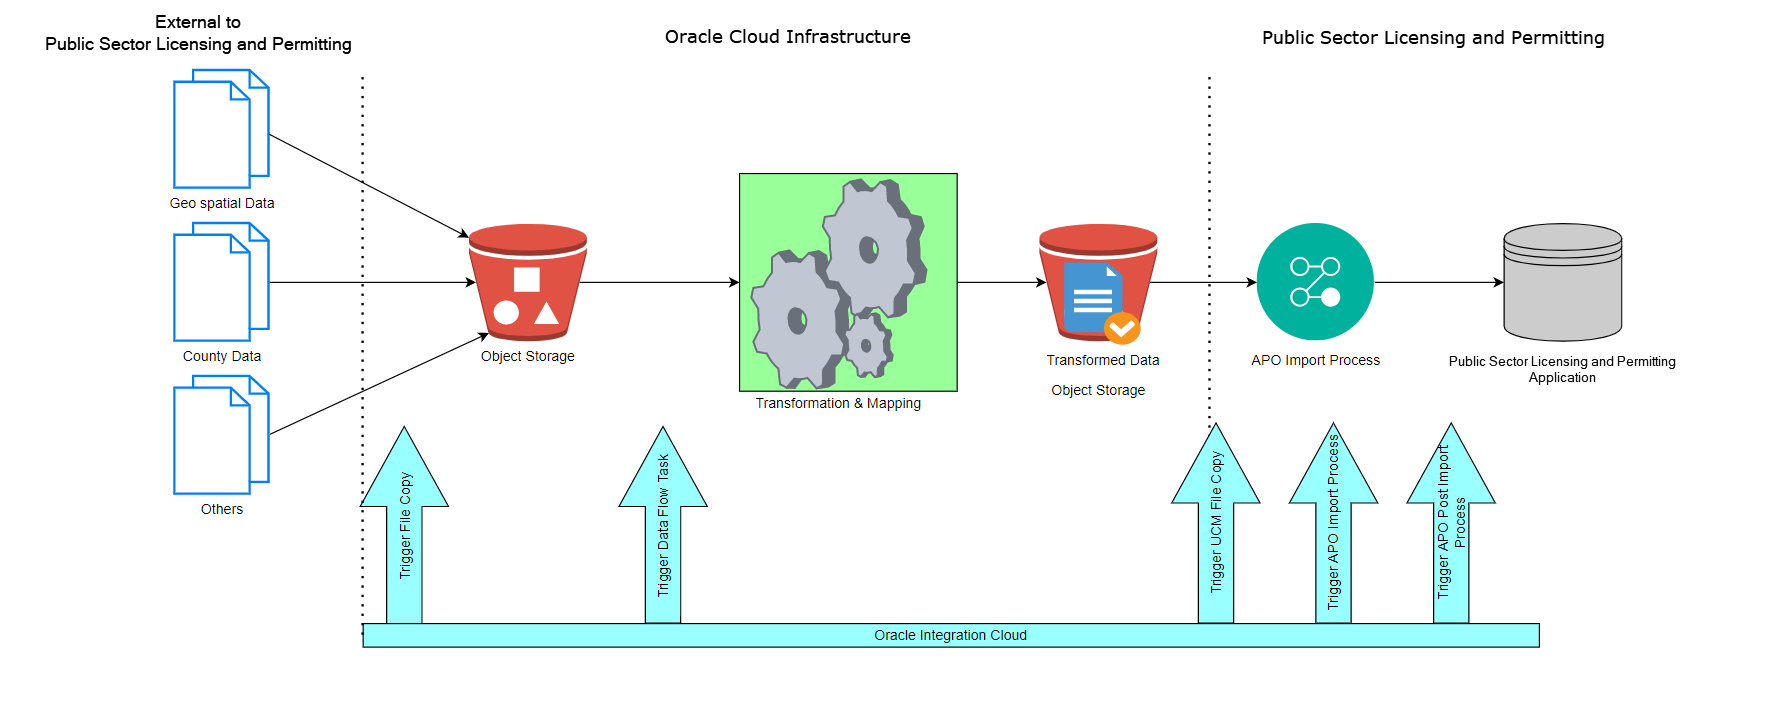 Reference architecture for the Oracle Permitting and Licensing end-to-end APO import process